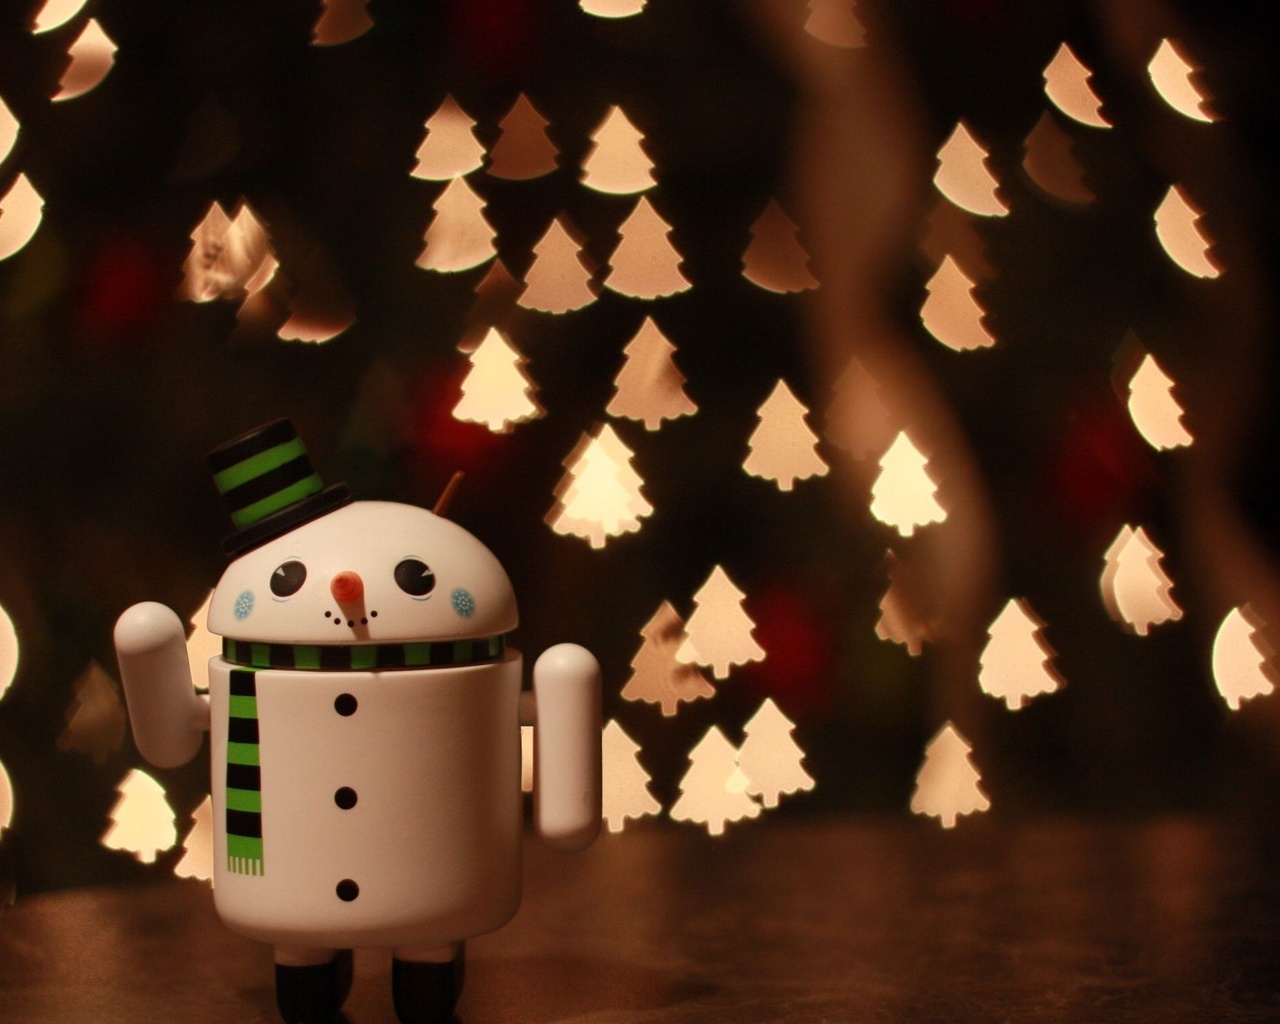 merry christmas, wallpapers, android, snowman